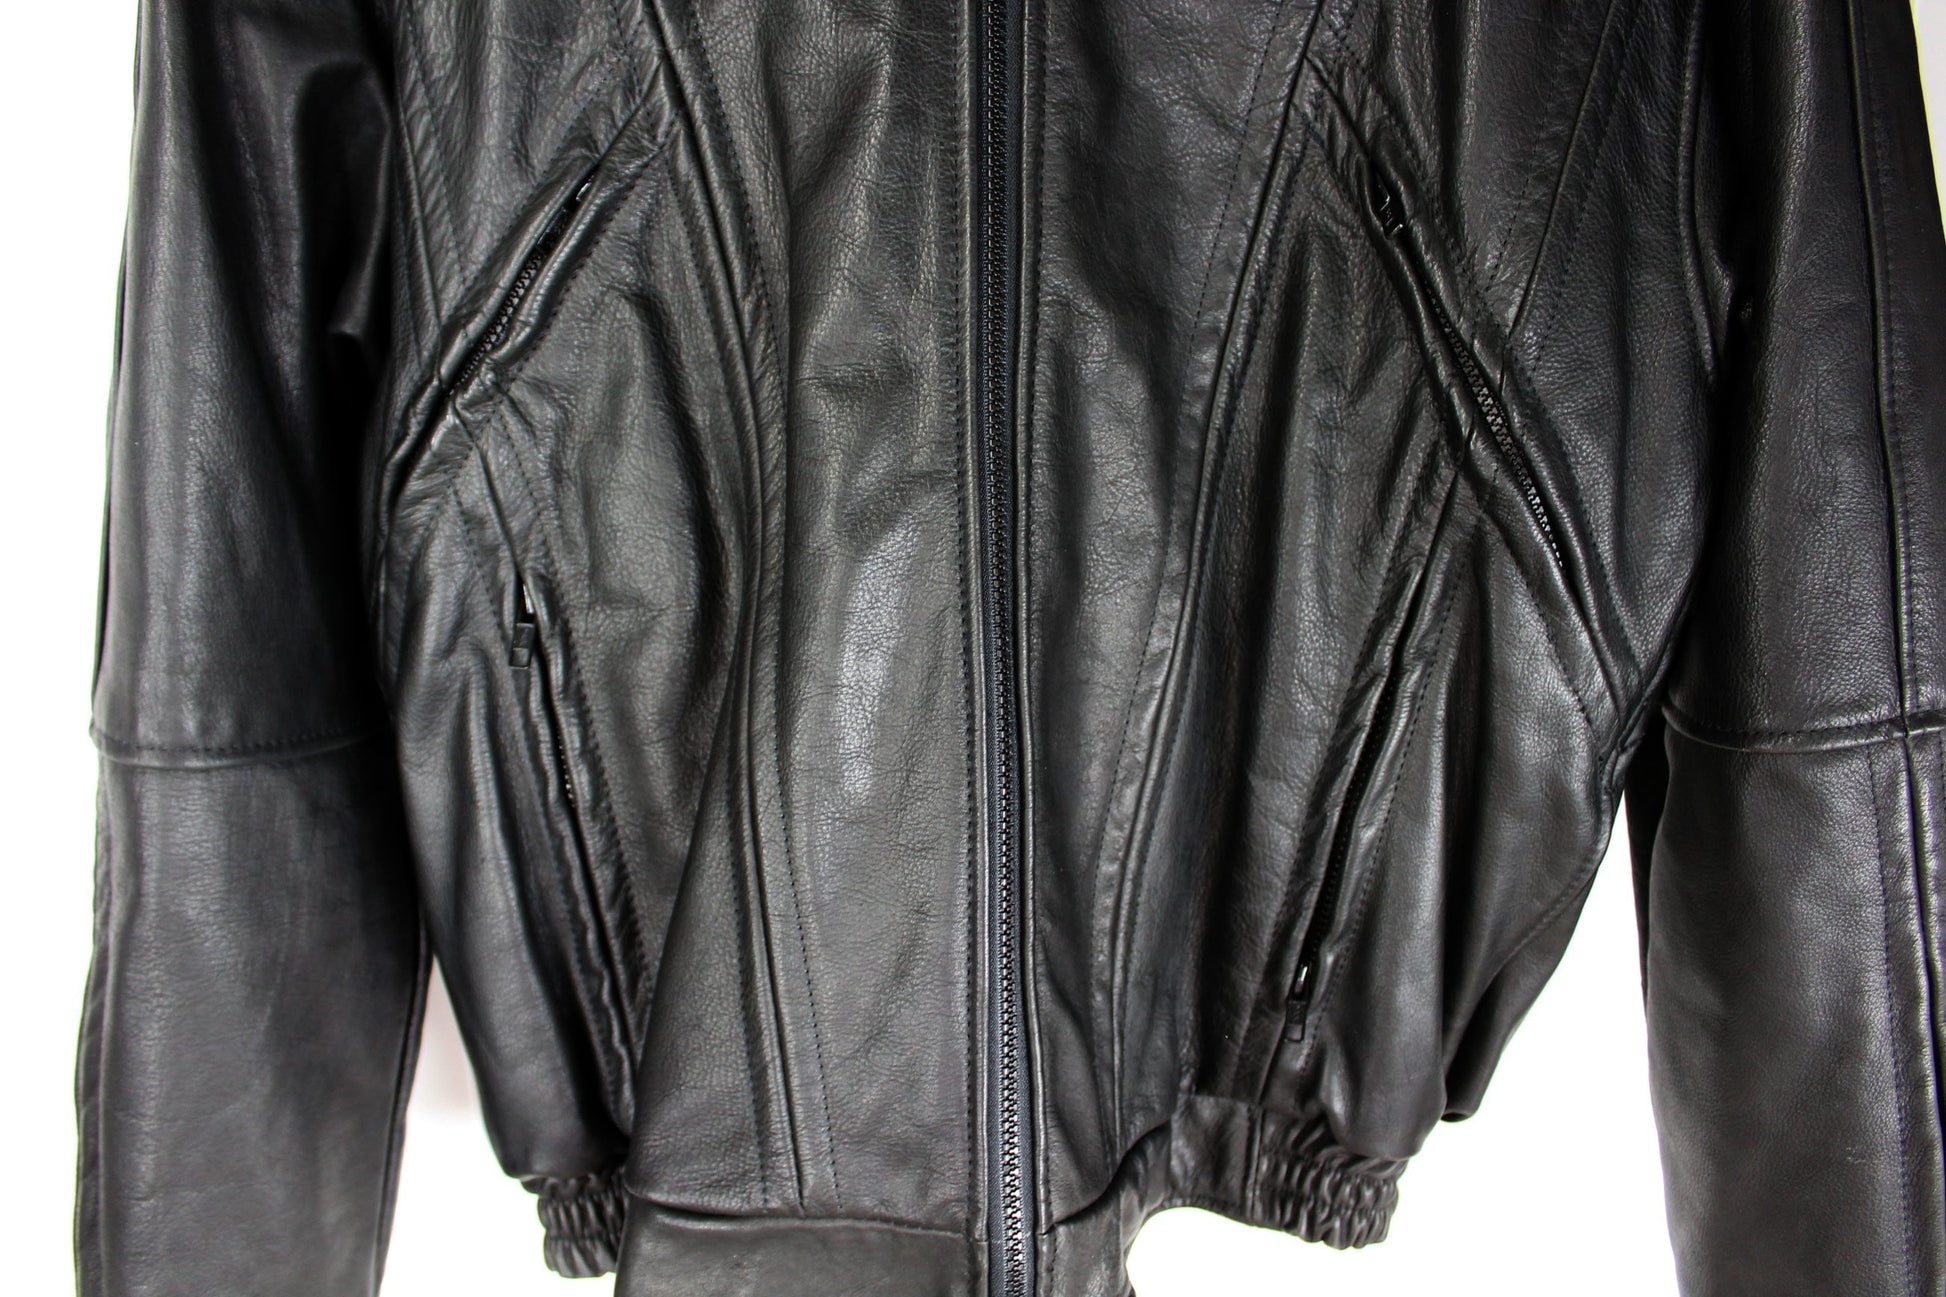 Protech USA Performance Leather Black Motorcycle Jacket M Vintage - Thinsulate Lining  extremely heavy good leather